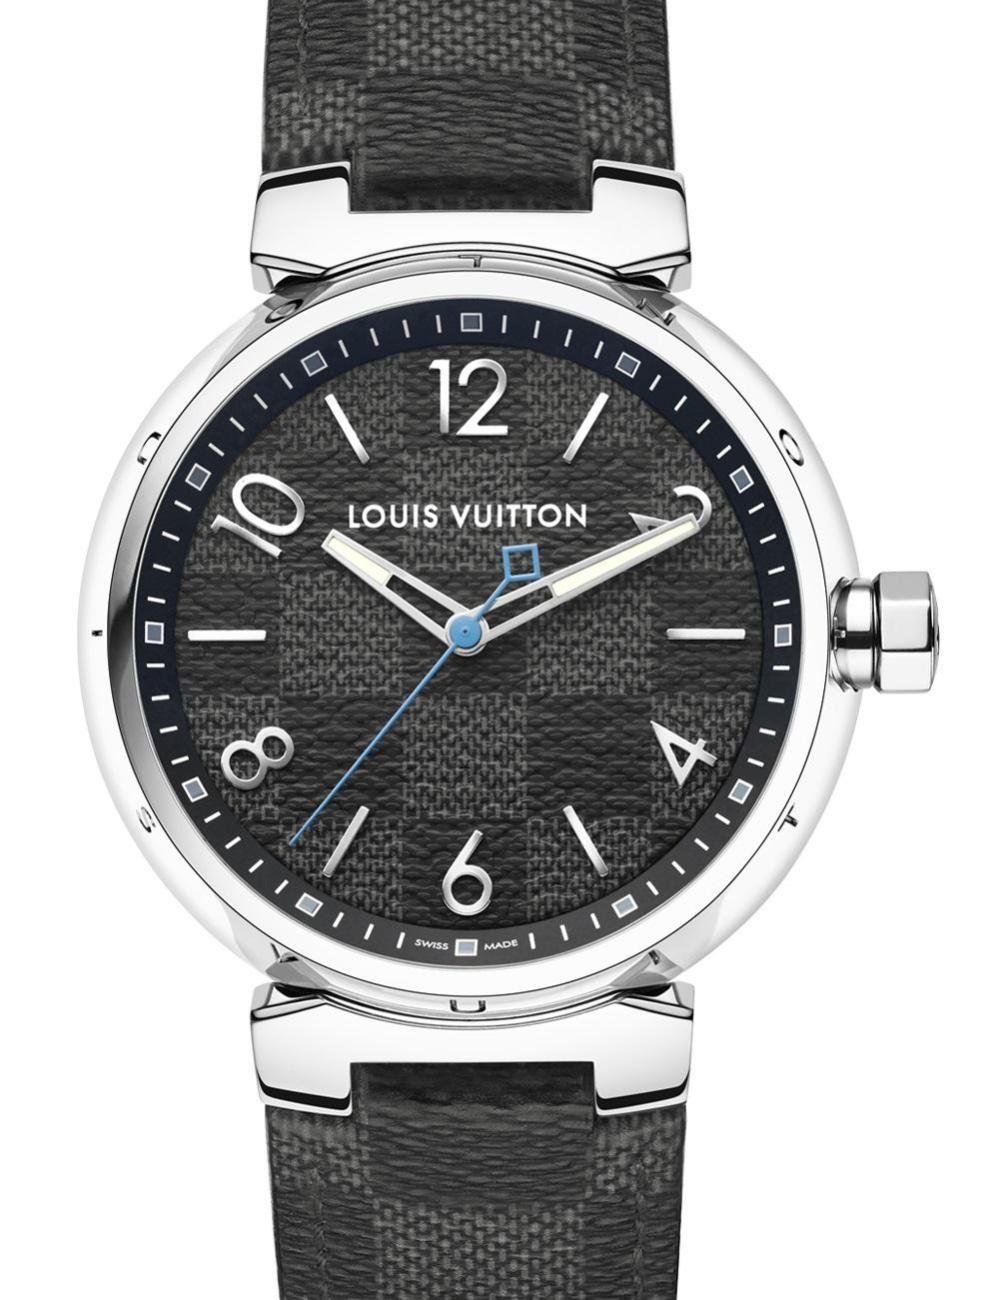 Louis Vuitton Tambour watch celebrates 12 years of watchmaking  The  Jewellery Editor